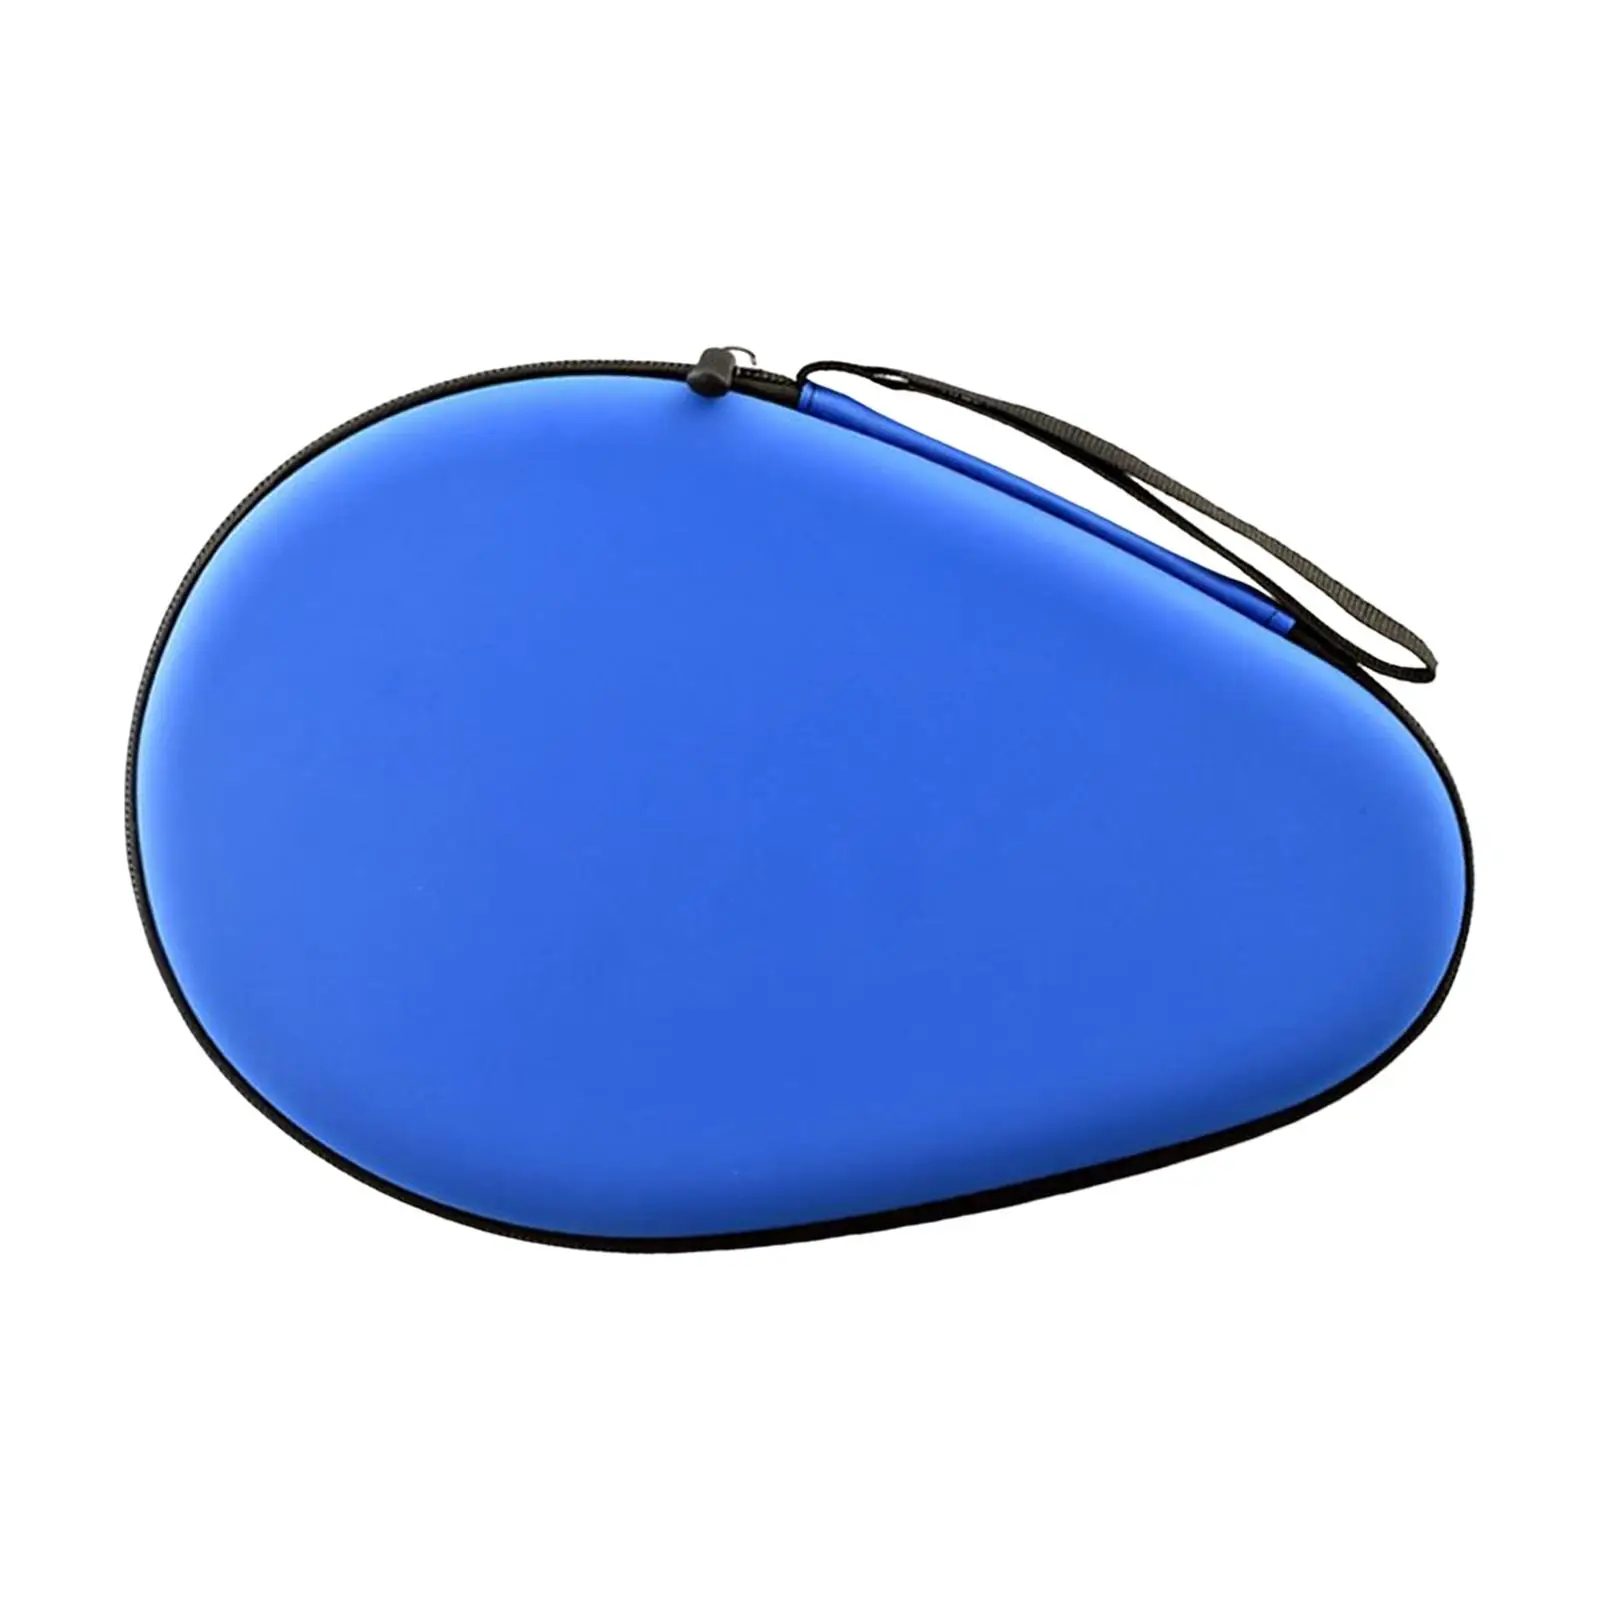 Multifunction Table Tennis Racket Resistant Pong Paddle Bag for Indoor Training